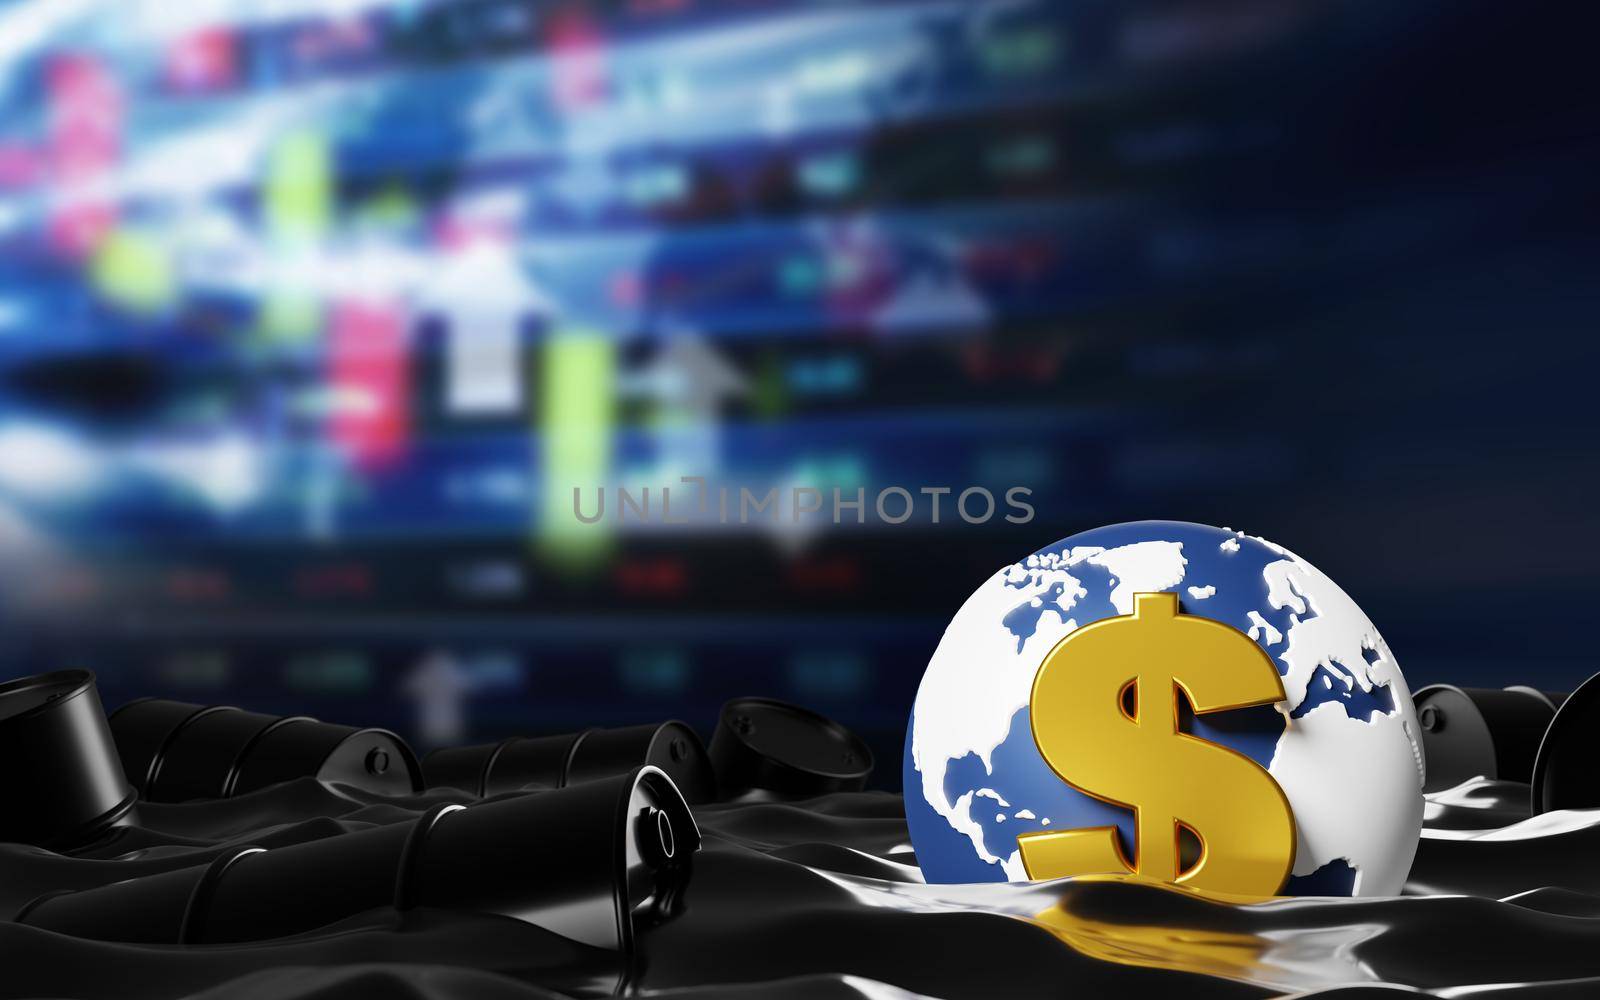 Crude oil price concept design of world and dollar sign with oil barrels 3D render